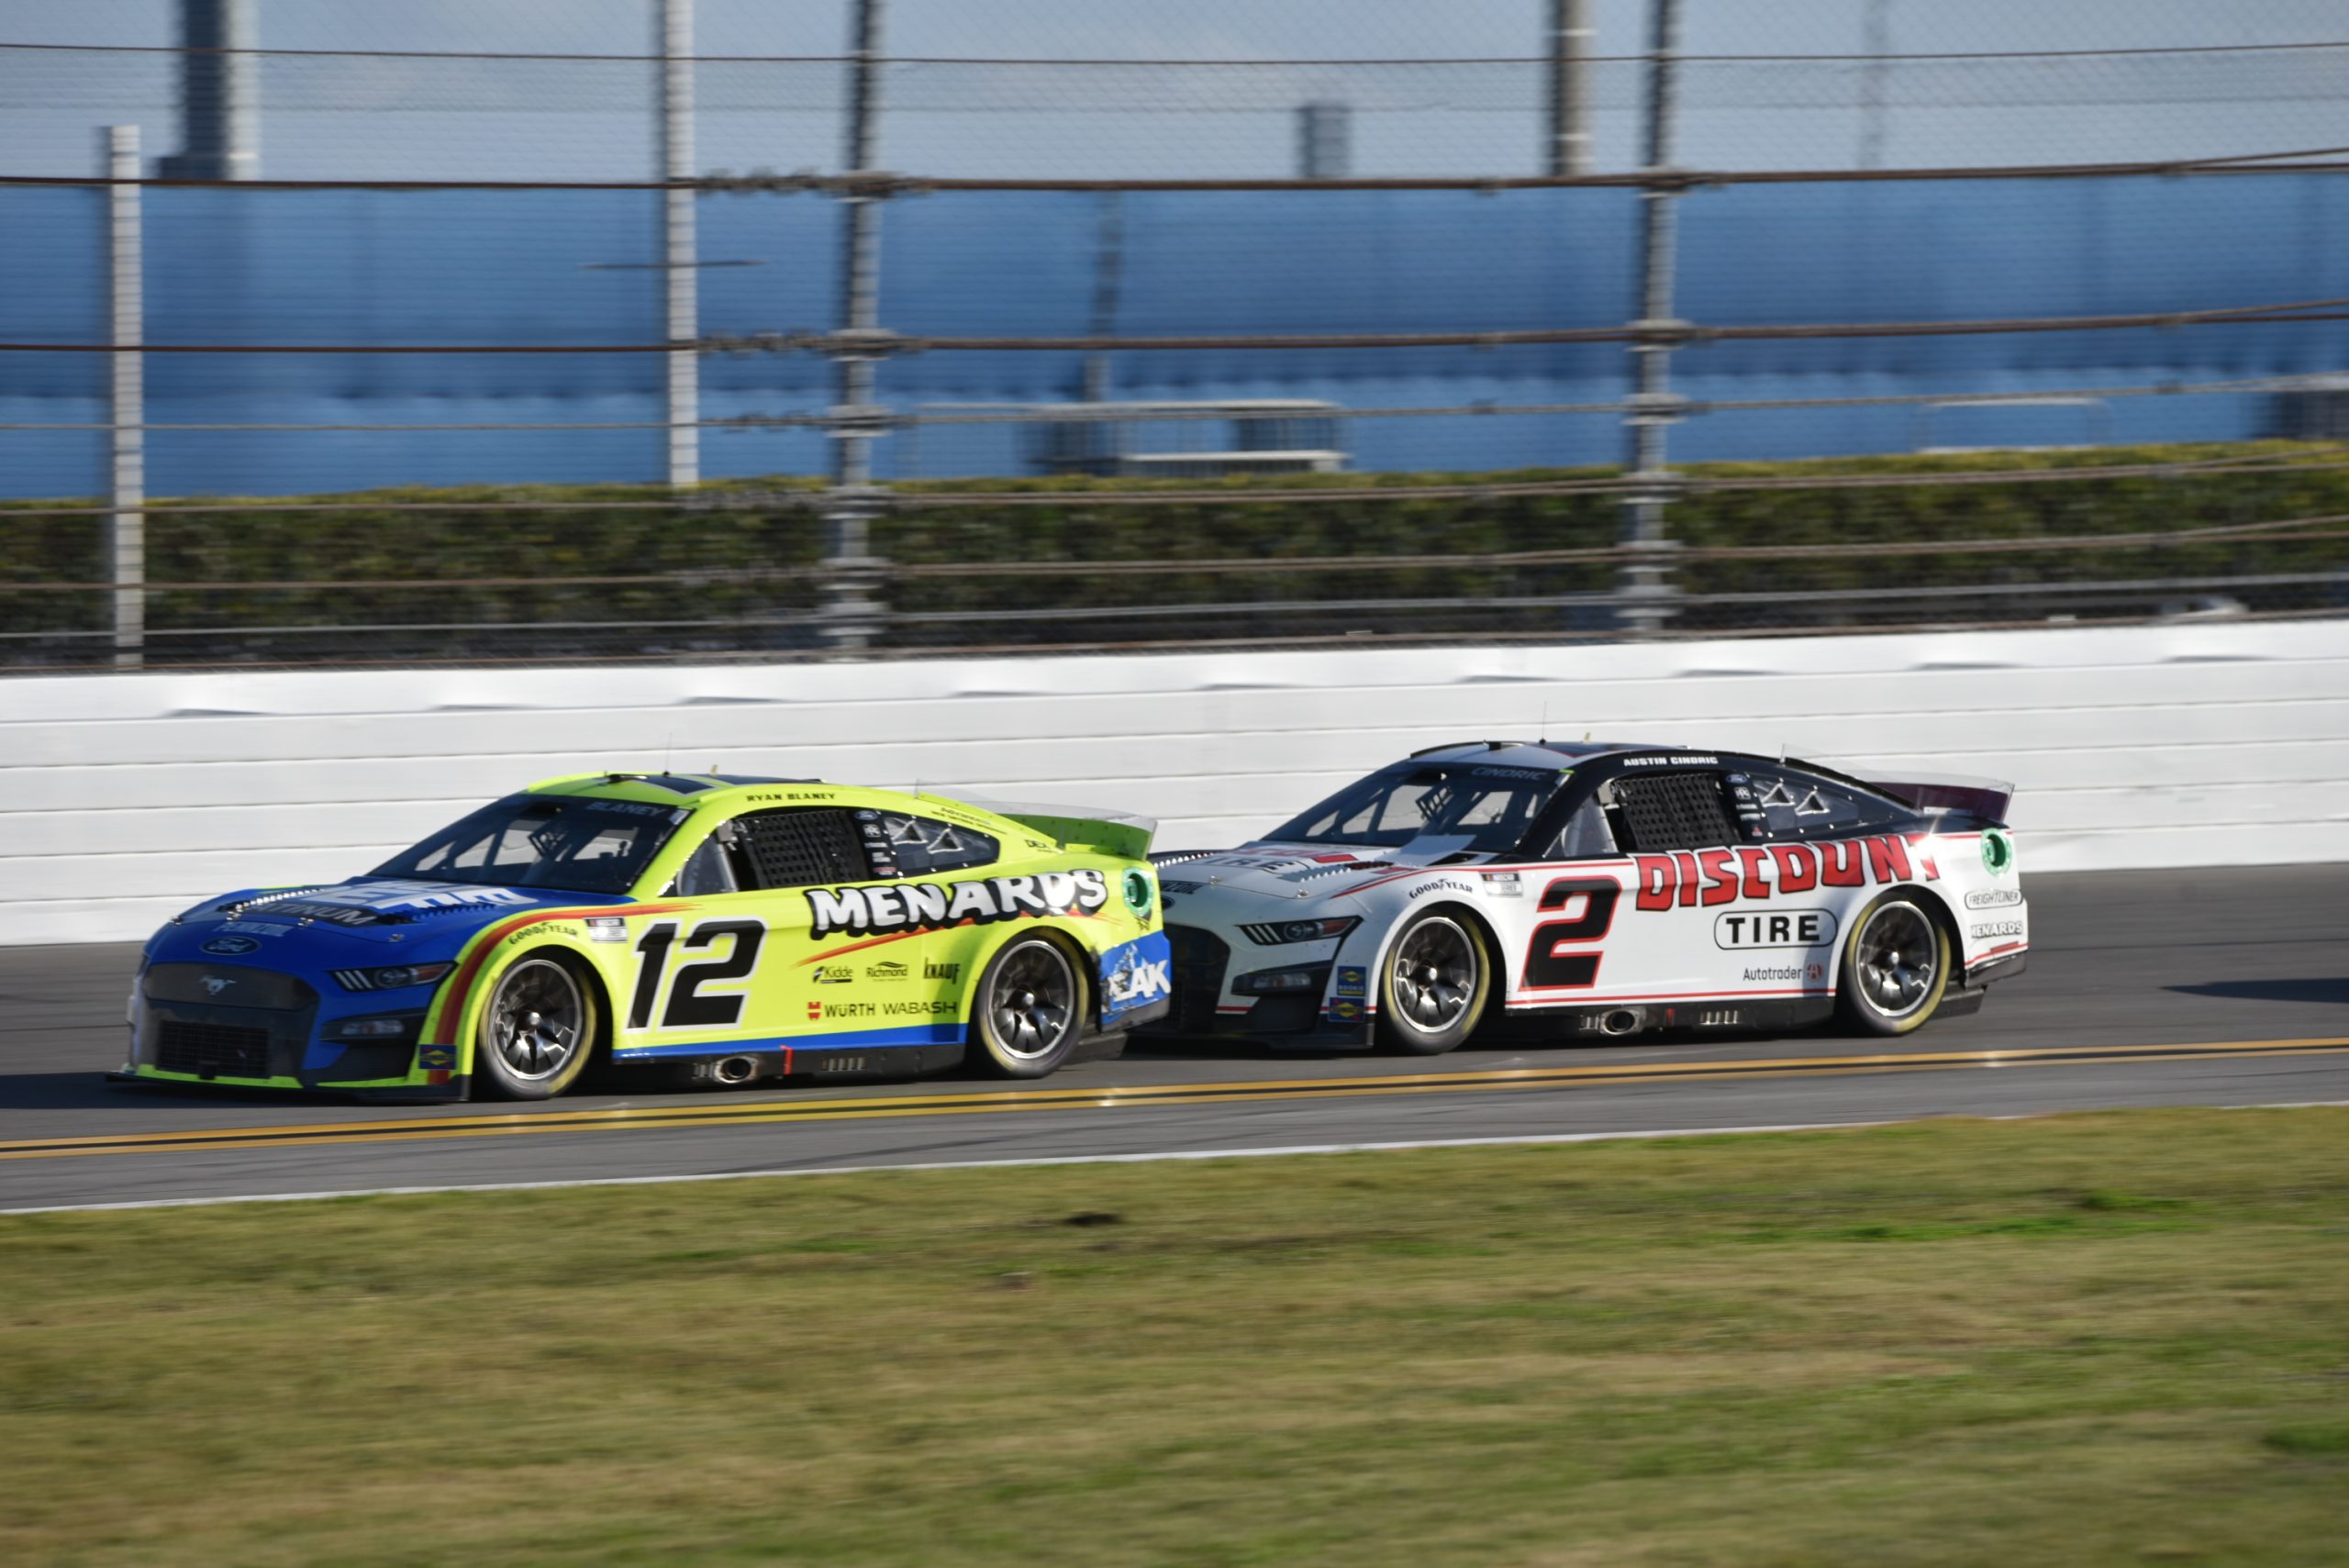 Since a fourth at Daytona, Blaney's had a bit of a bumpy two race streak at Fontana and Las Vegas. (Photo: Luis Torres | The Podium Finish)